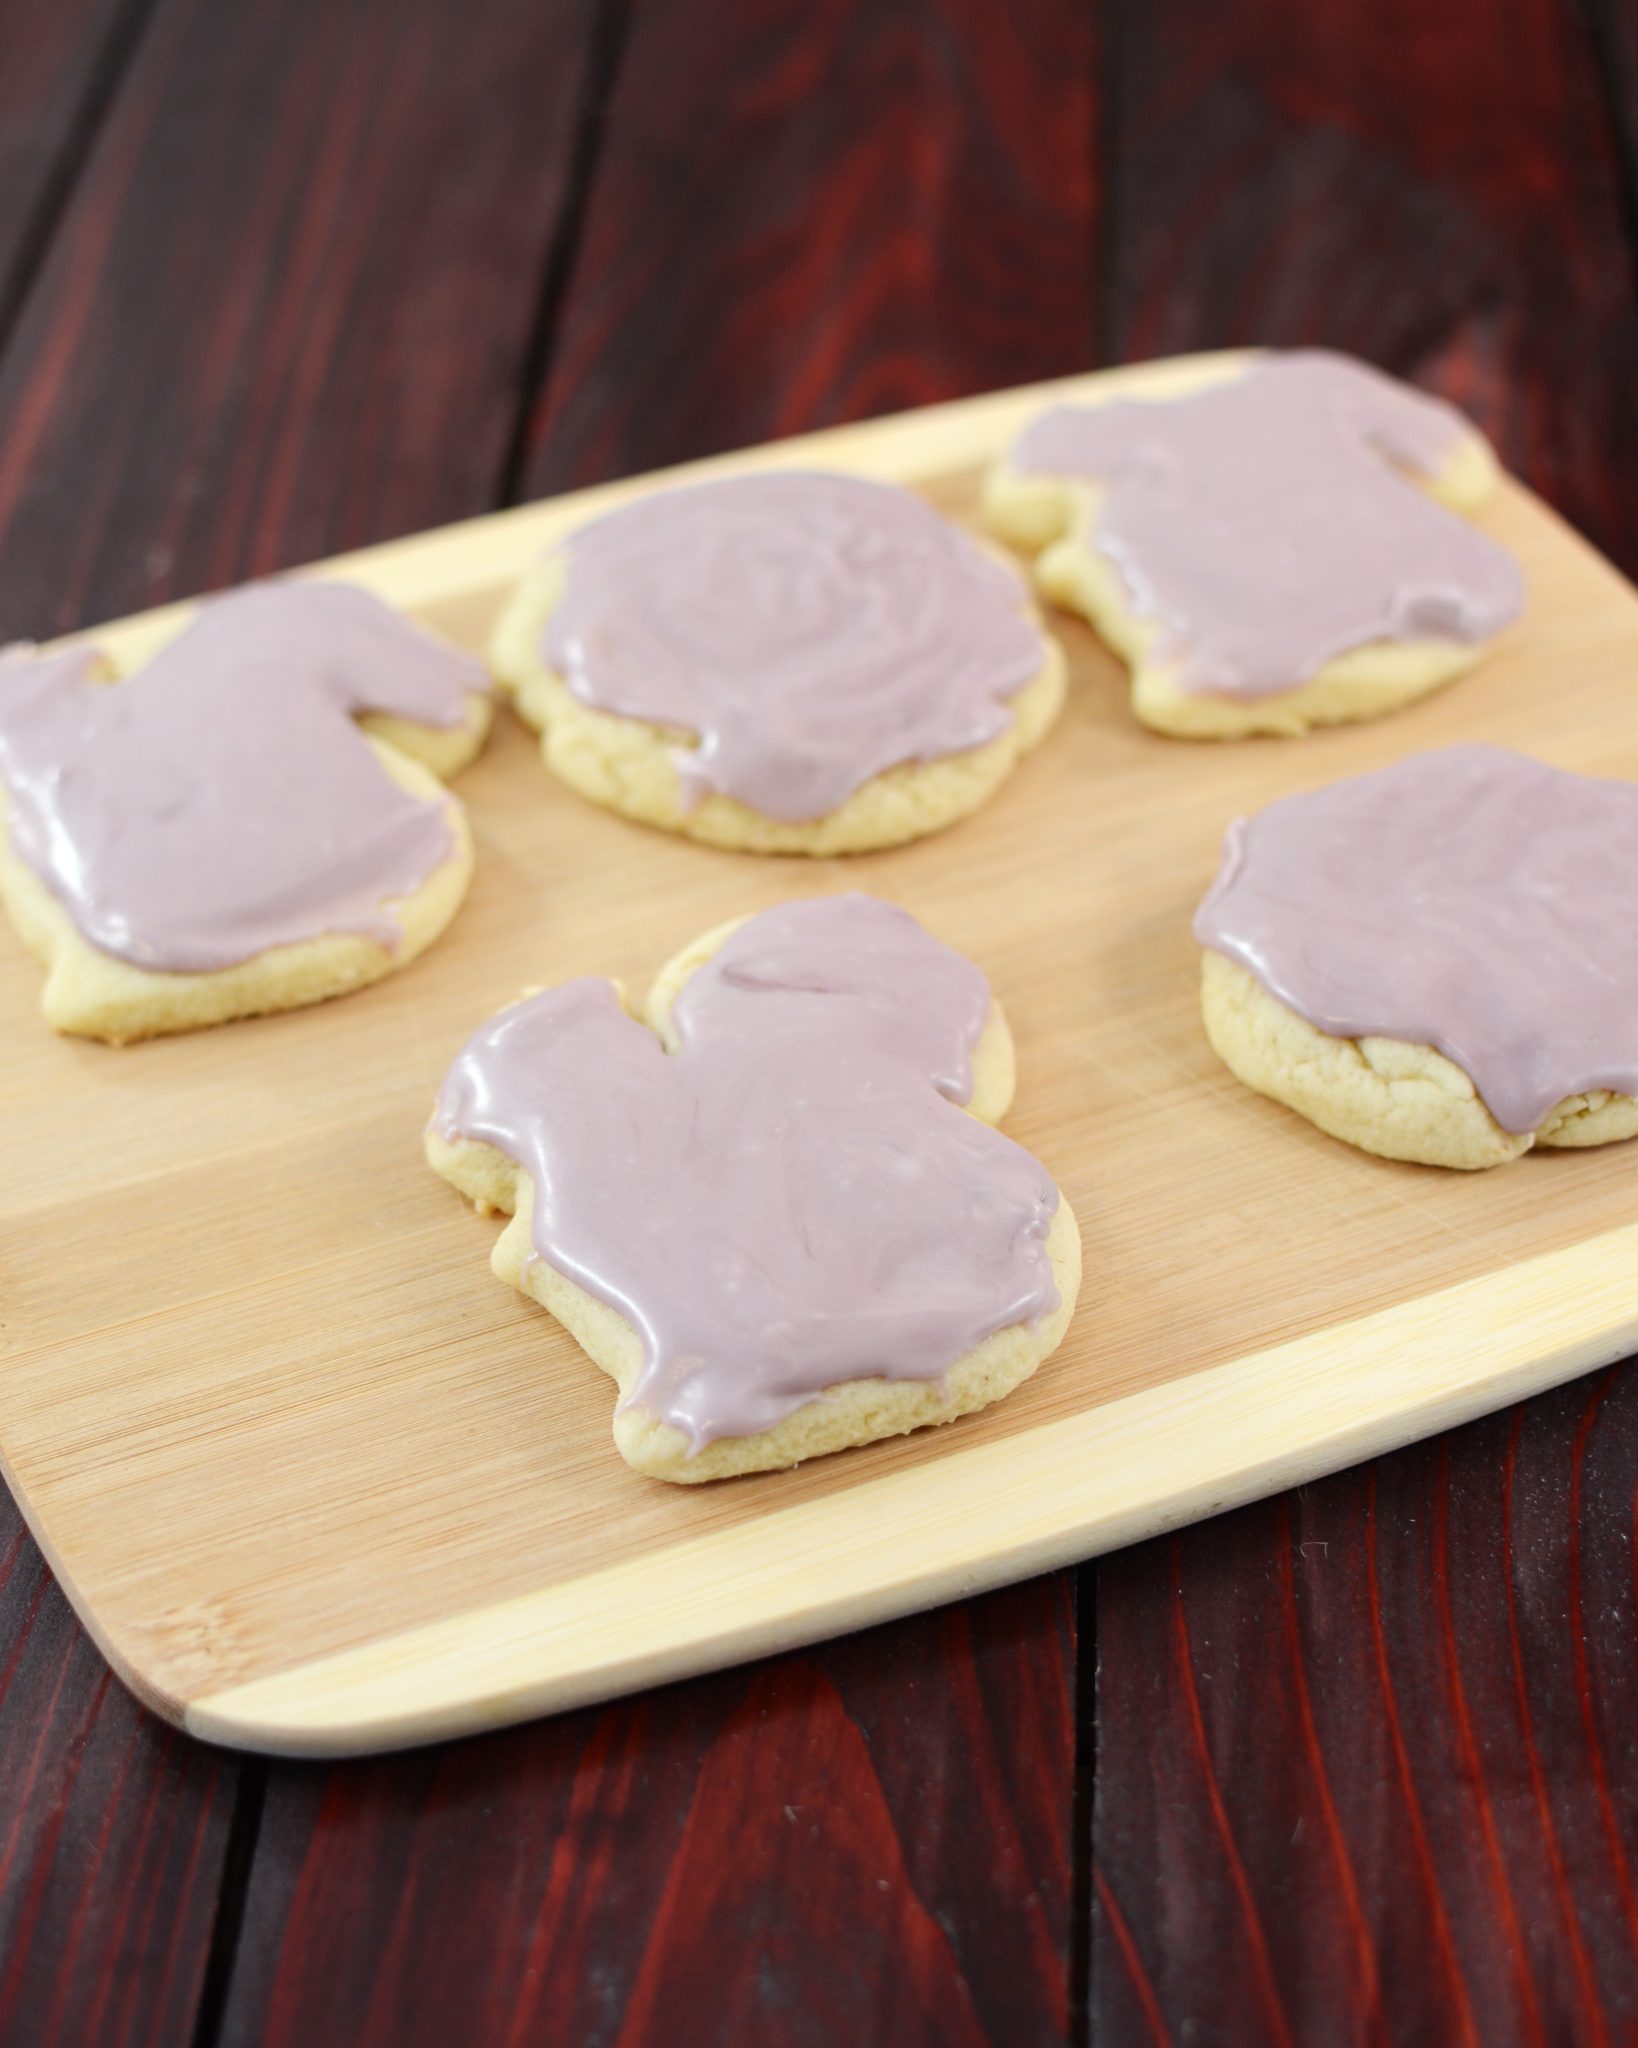 Five sugar cookies with purple frosting on a wooden cutting board.